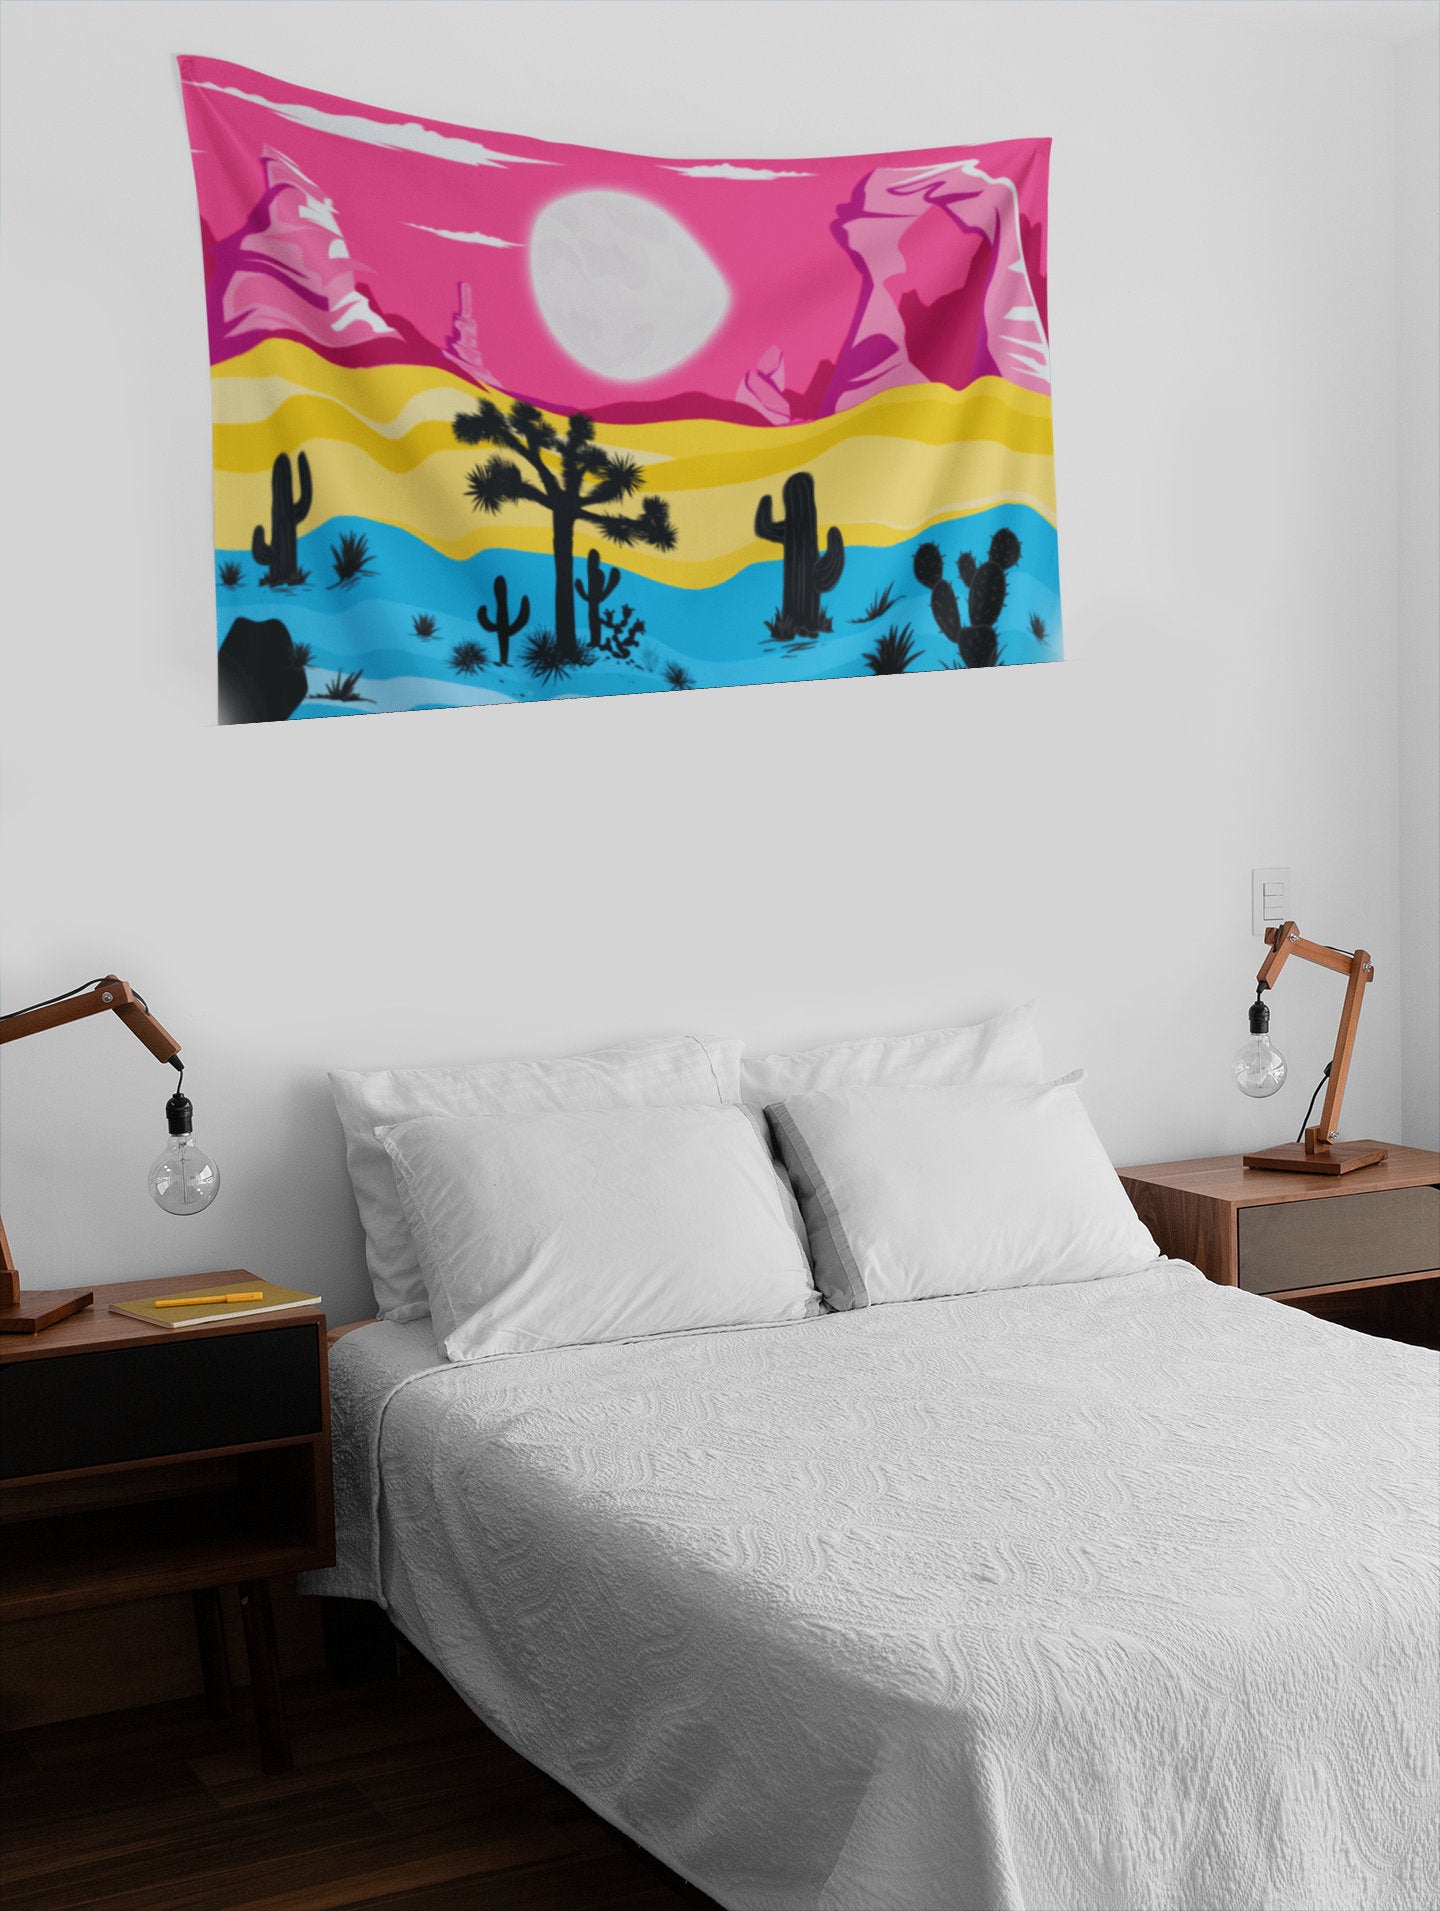 Discreet Pansexual Pride Landscape Tapestry | Indoor LGBTQ Wall Tapestries (Series 1 of 3)